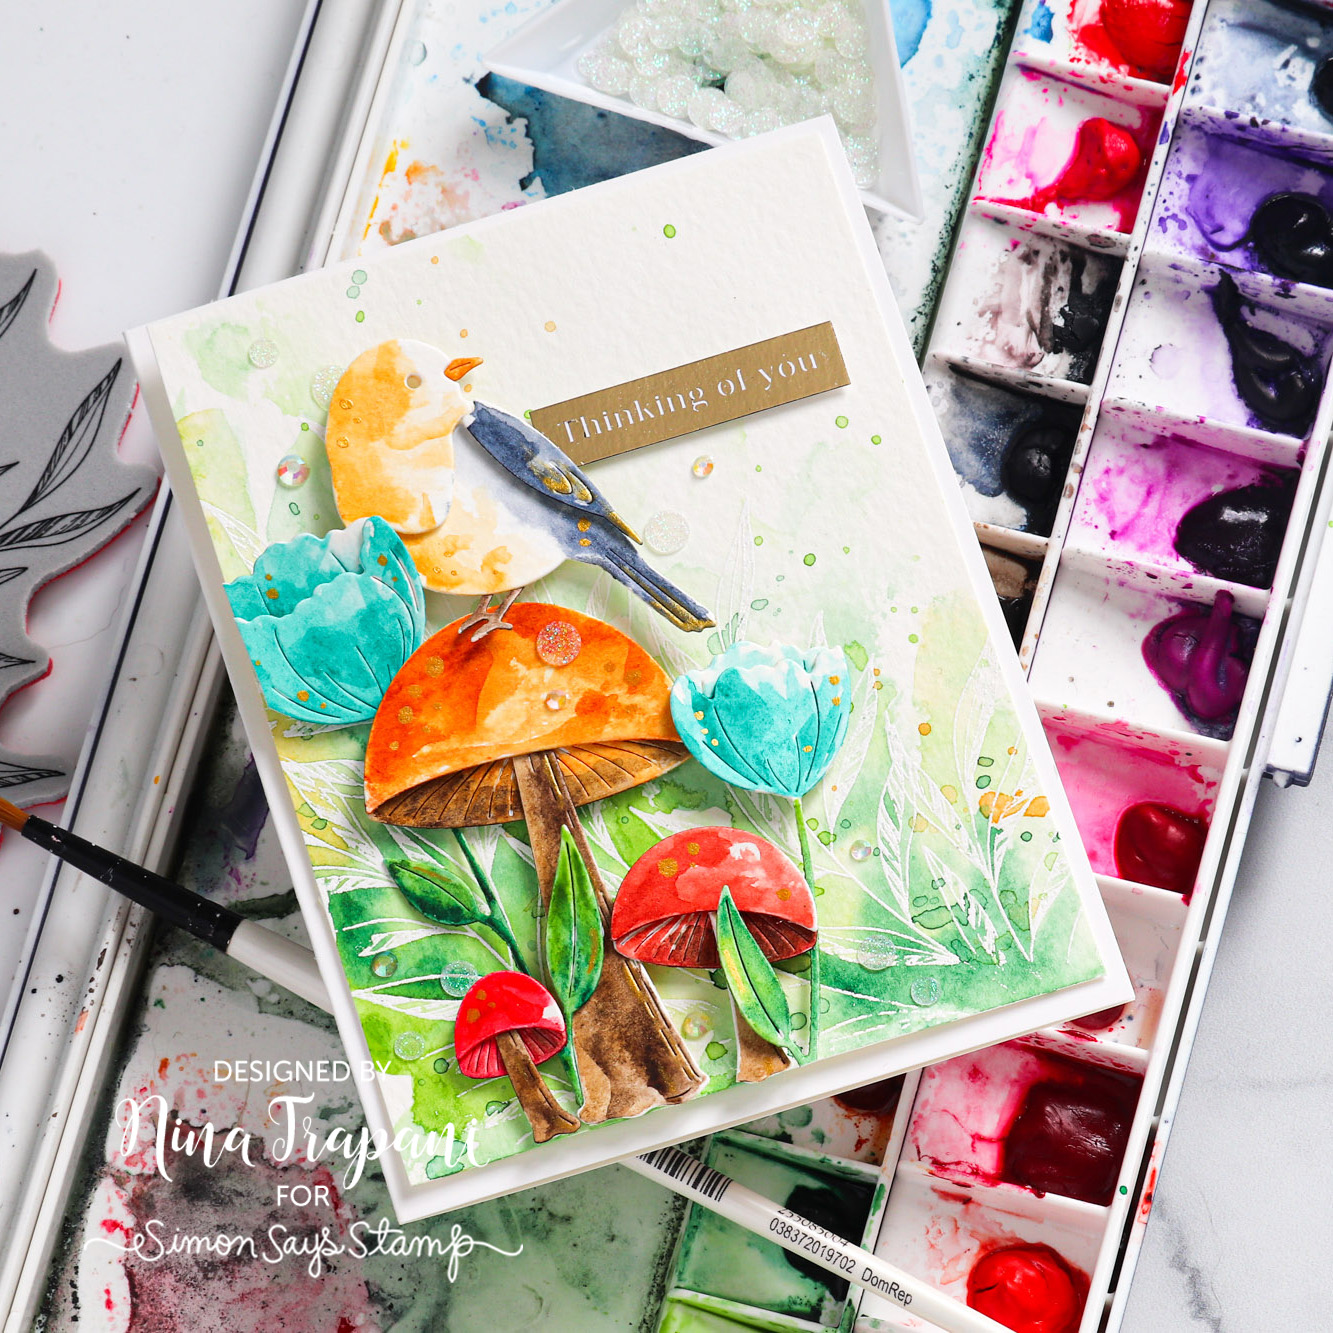 5 Reasons Why I Think Tim Holtz's Rotary Media Trimmer is a Must-Have Tool!  - Nina-Marie Design